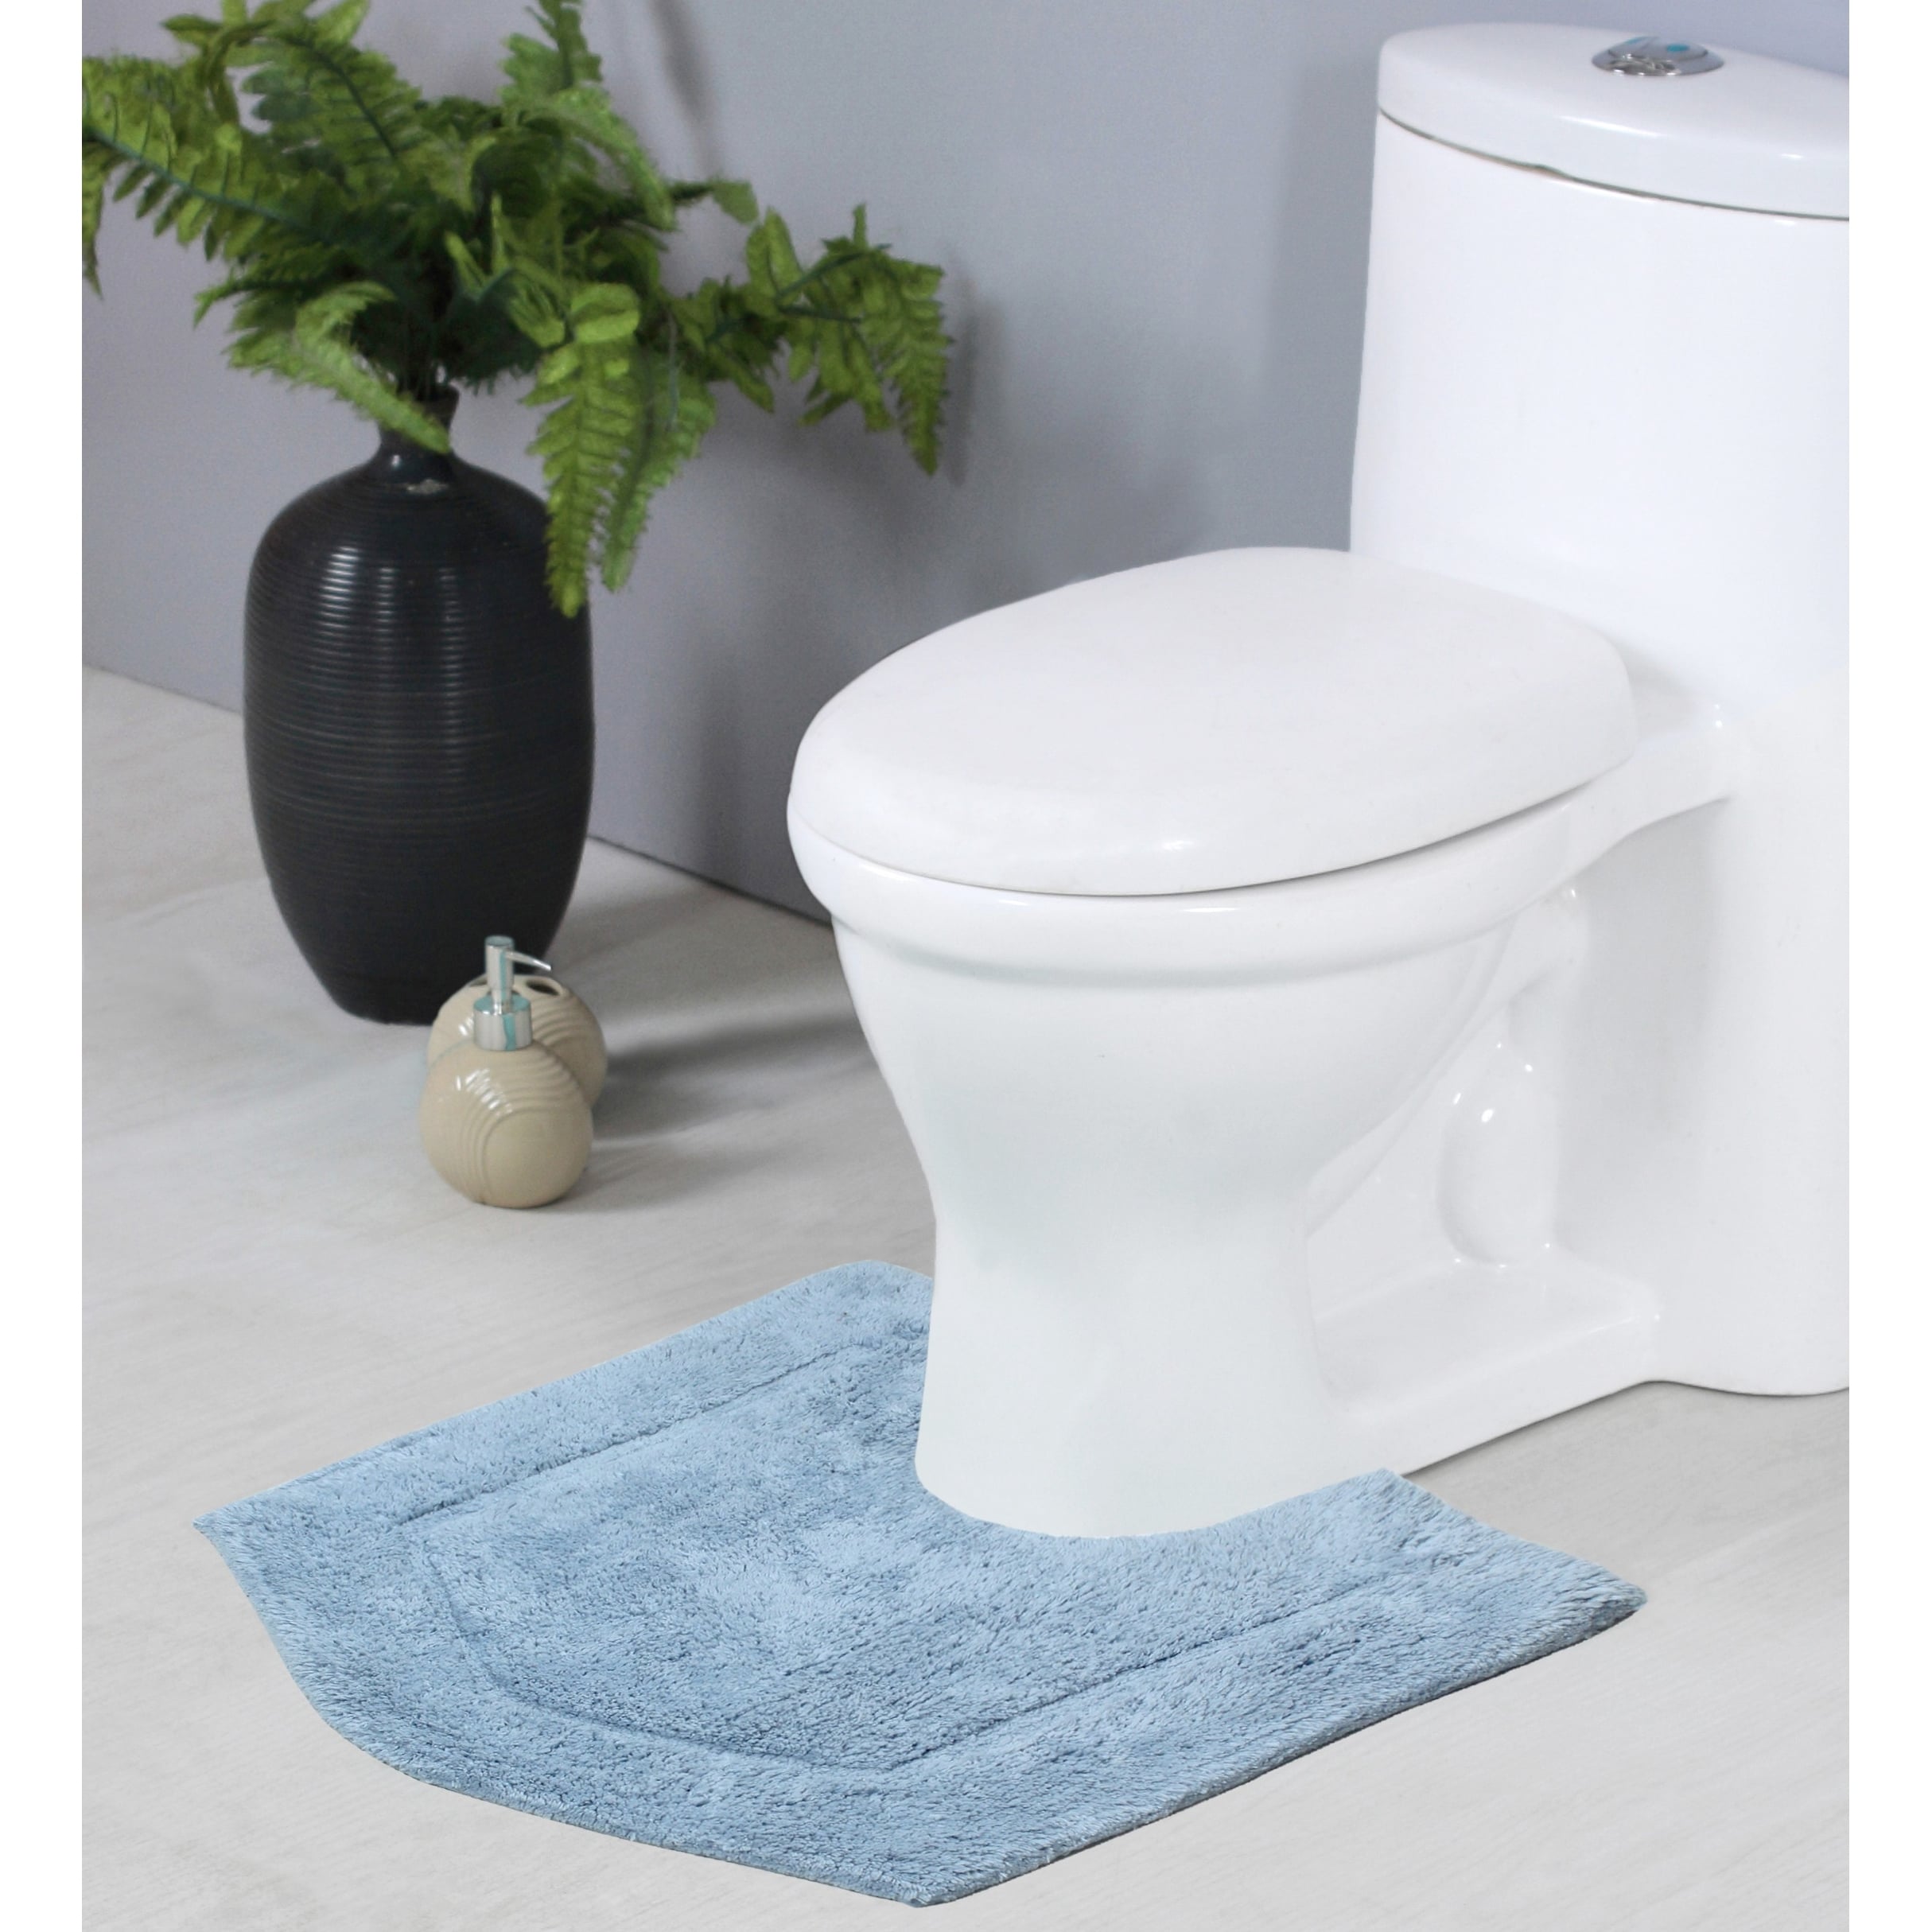 https://ak1.ostkcdn.com/images/products/is/images/direct/165c6f984247c70e89efd9bec086ba77190e80ab/Home-Weavers-WatreFord-Collection-Thick-Toilet-Bath-Rugs-U-Shaped-Contour-Non-Slip-Cotton-Soft-Absorbe-Machine-Washable-20%22x20%22.jpg